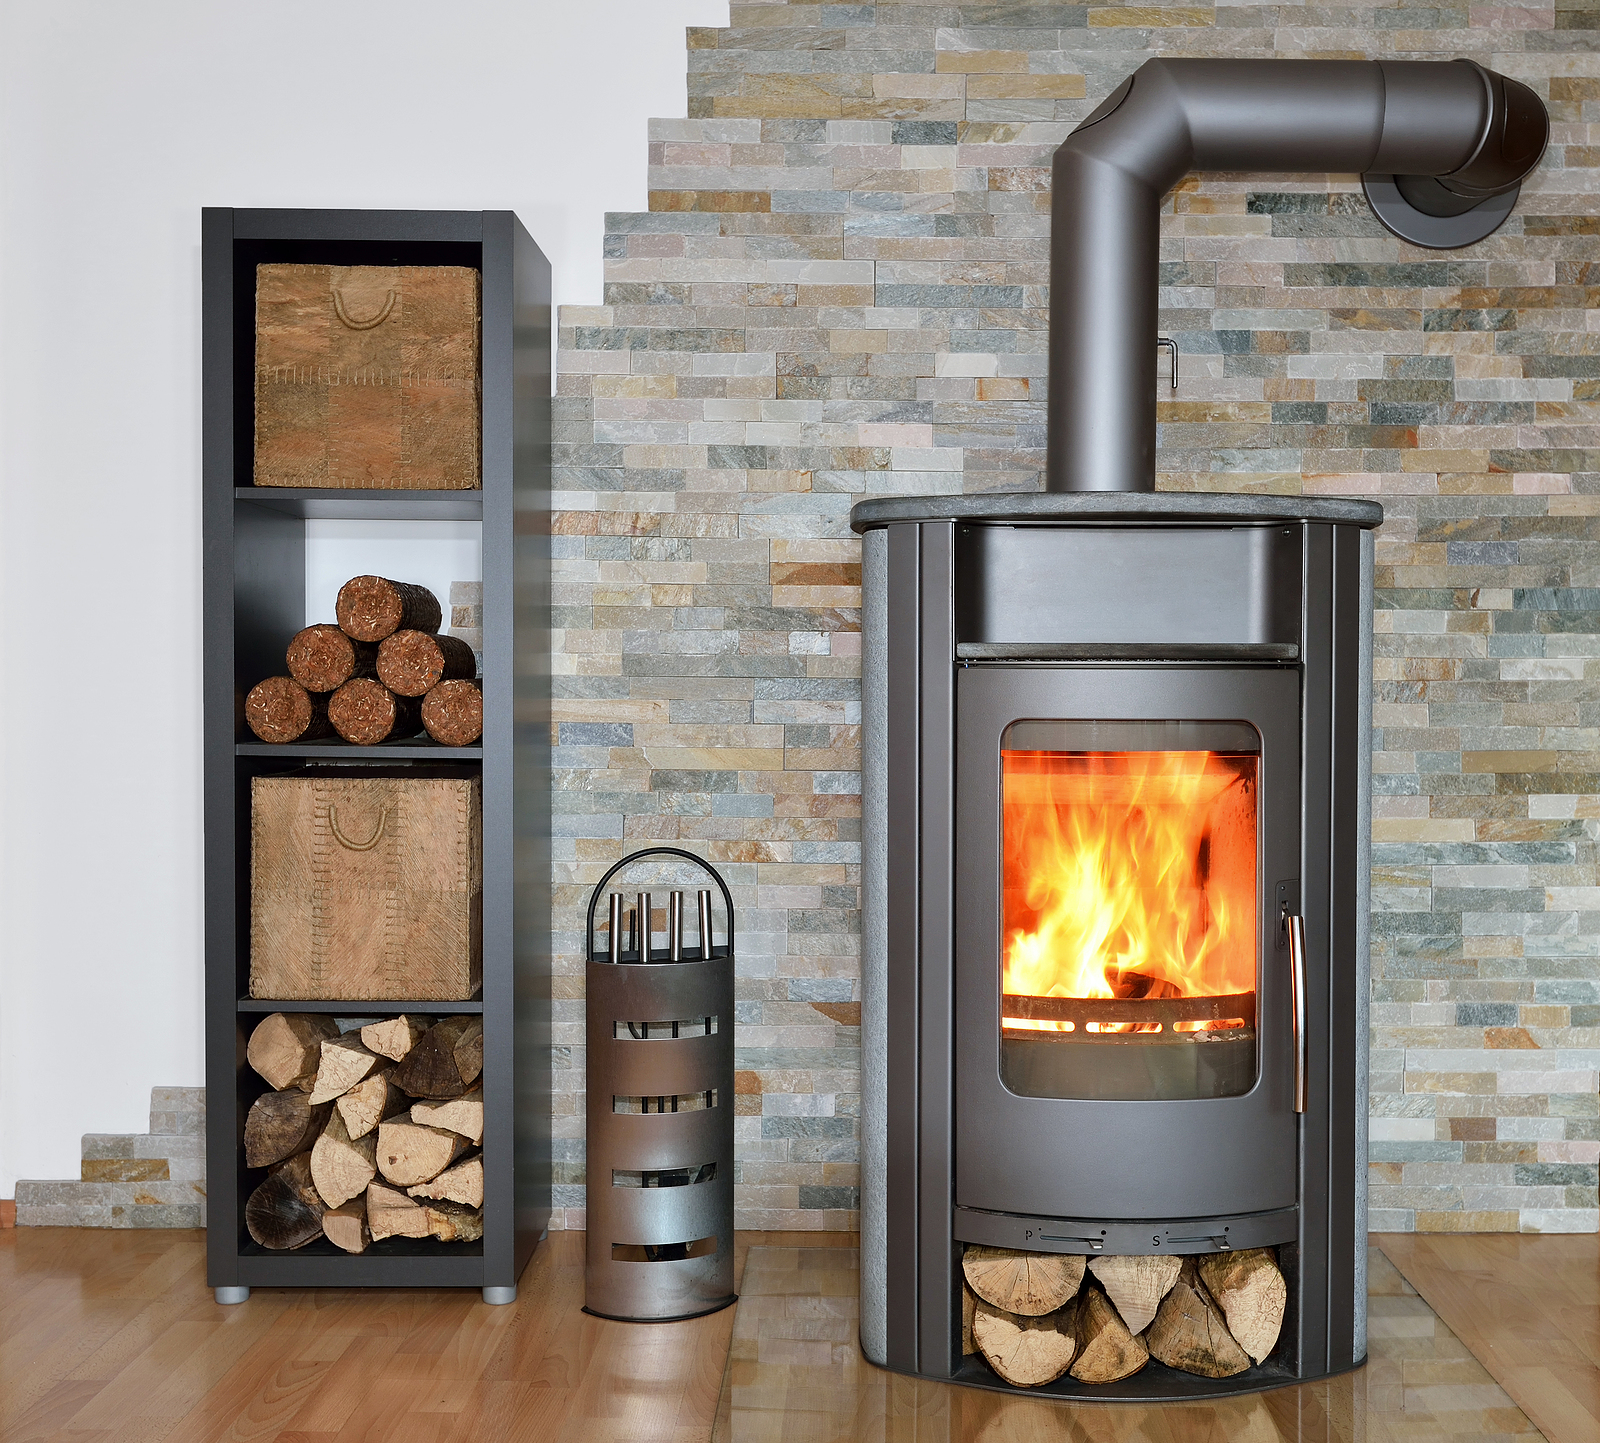 https://airqualitynews.com/wp-content/uploads/sites/2/2021/02/bigstock-Wood-Fired-Stove-55785521-1.jpg